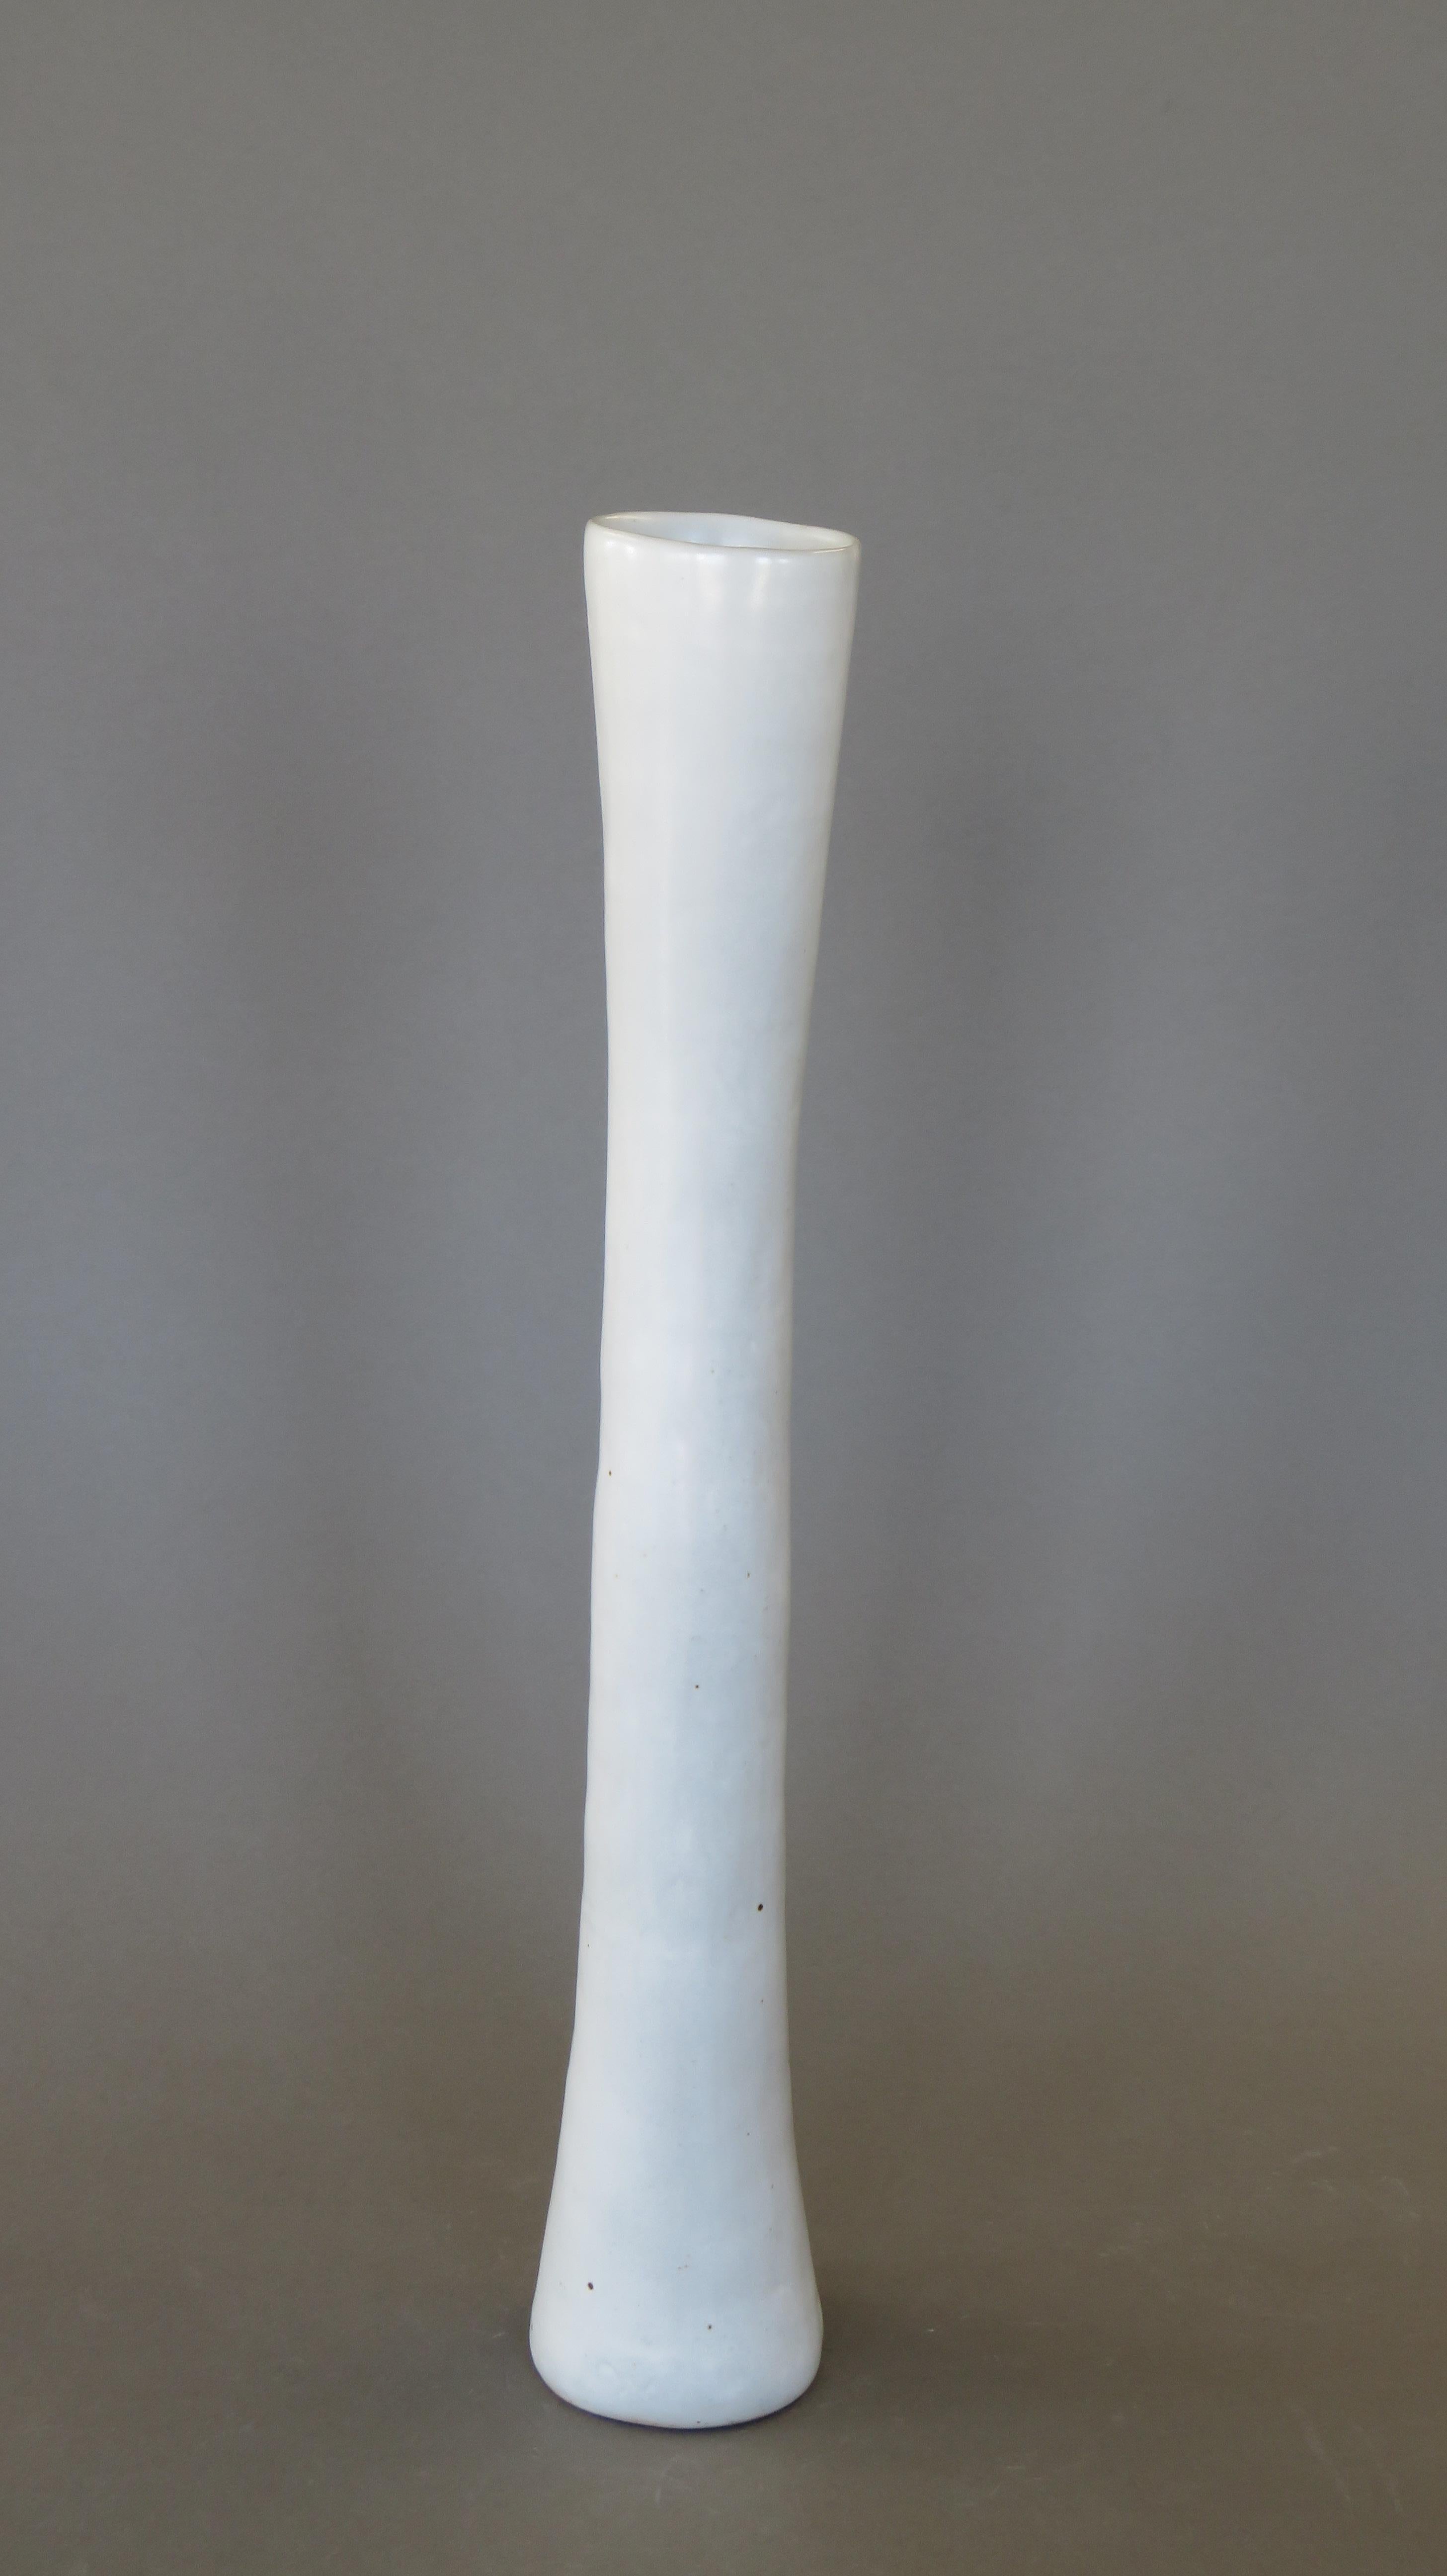 Organic Modern Tall Hand Built Ceramic Vase, White Glaze on Stoneware, 22.88 Inches Tall For Sale